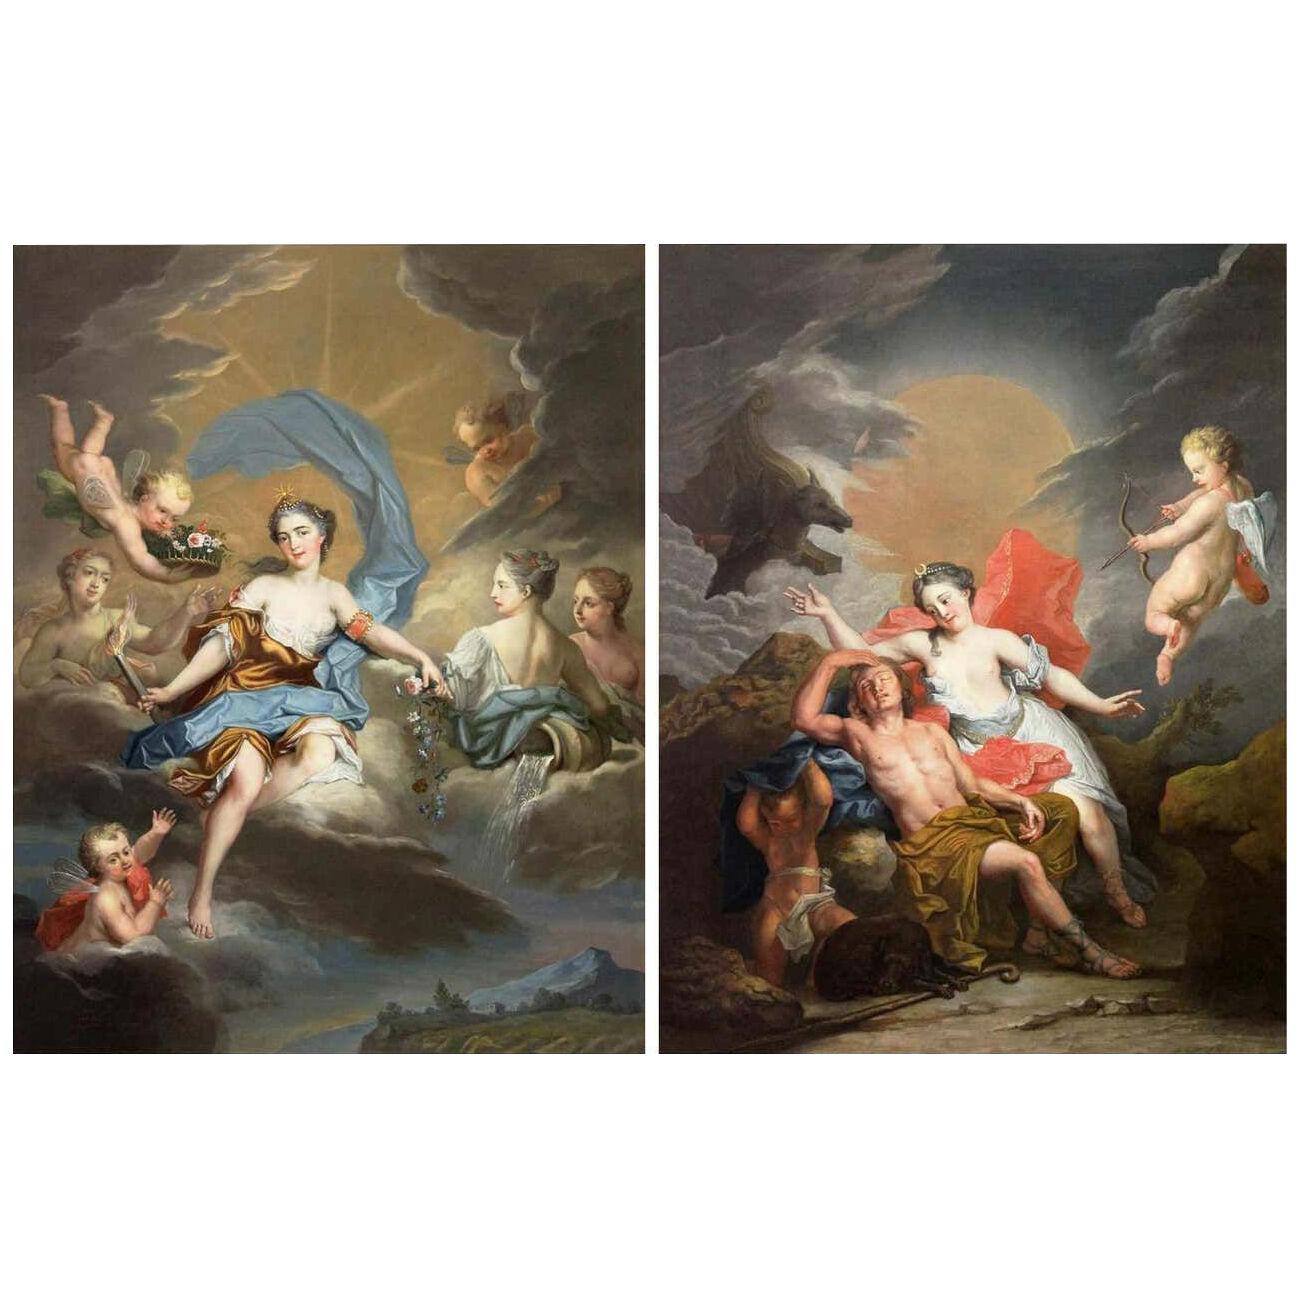 A Magnificent Pair of Allegorical Paintings "Aurora and Diana" "Night and Day"